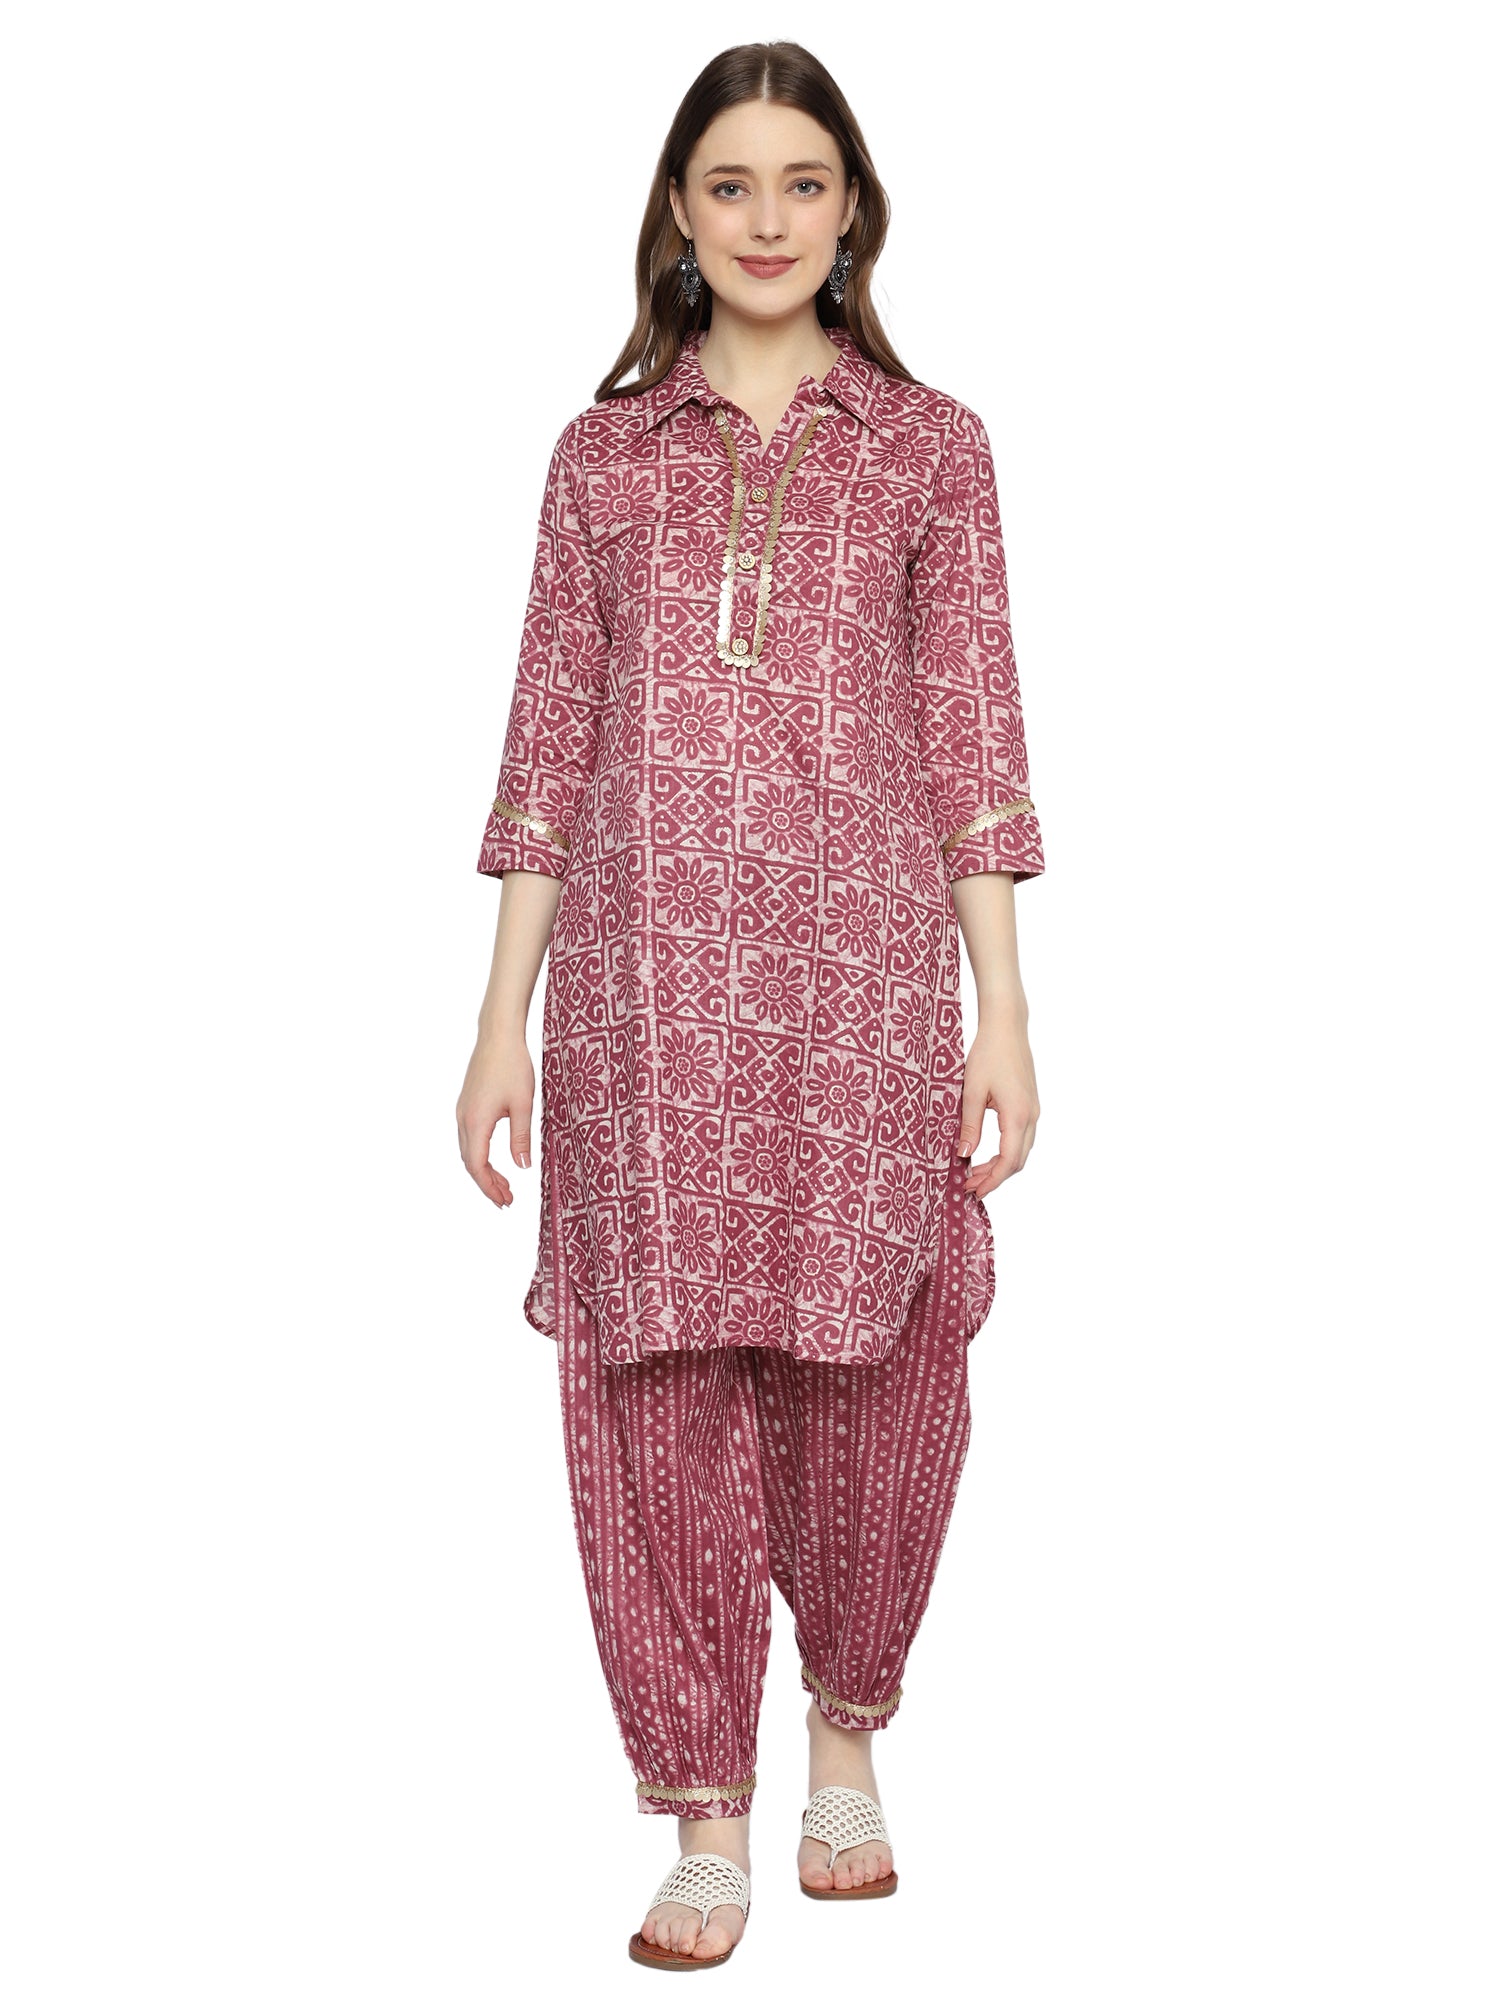 Pink Rayon Ethnic Co-ord Set with Printed White Lines